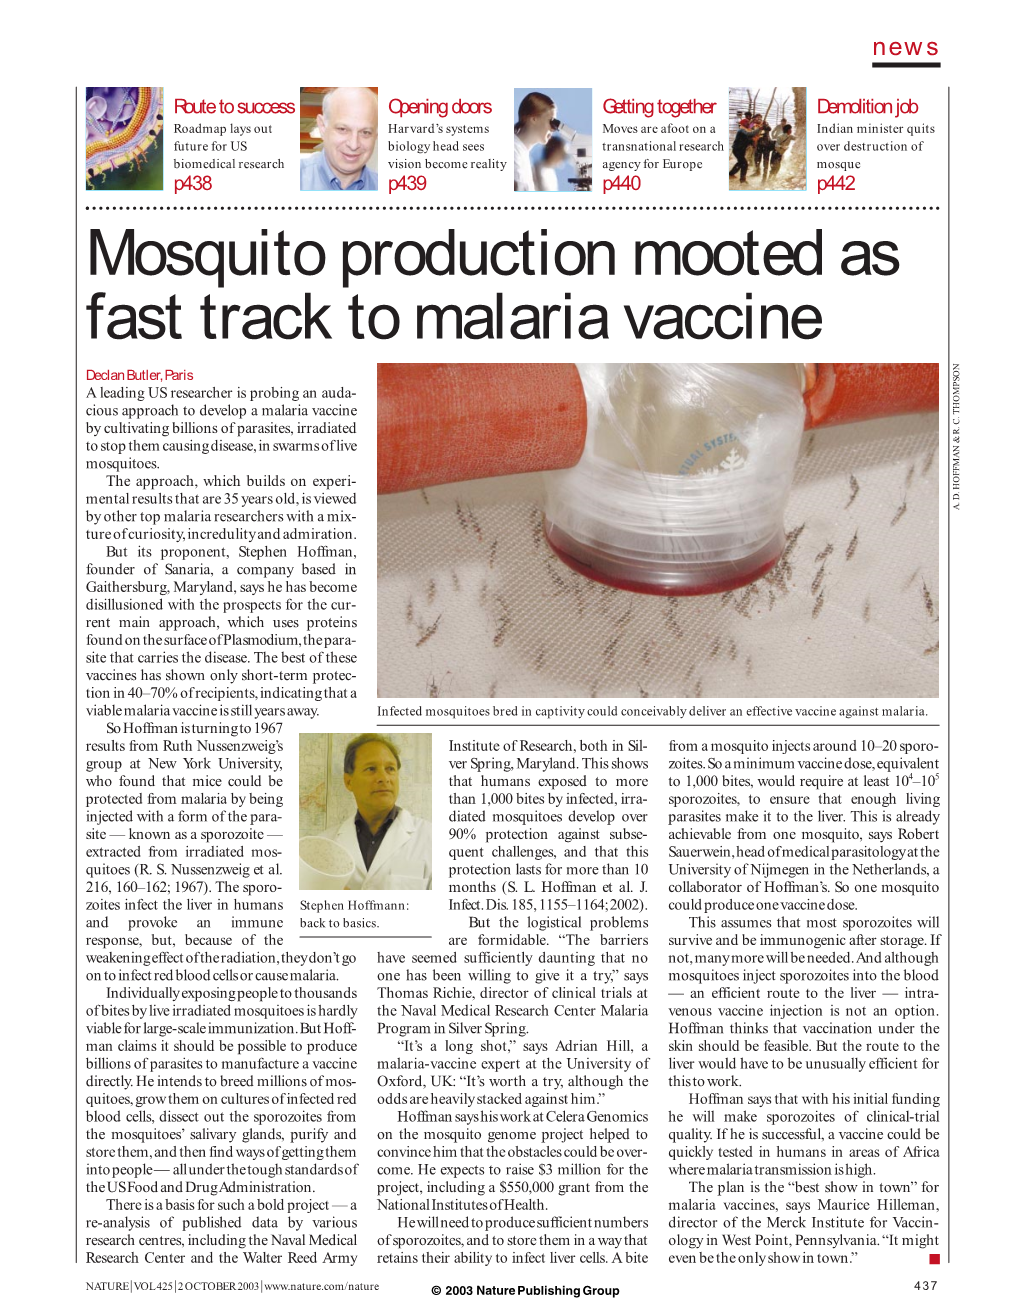 Mosquito Production Mooted As Fast Track to Malaria Vaccine